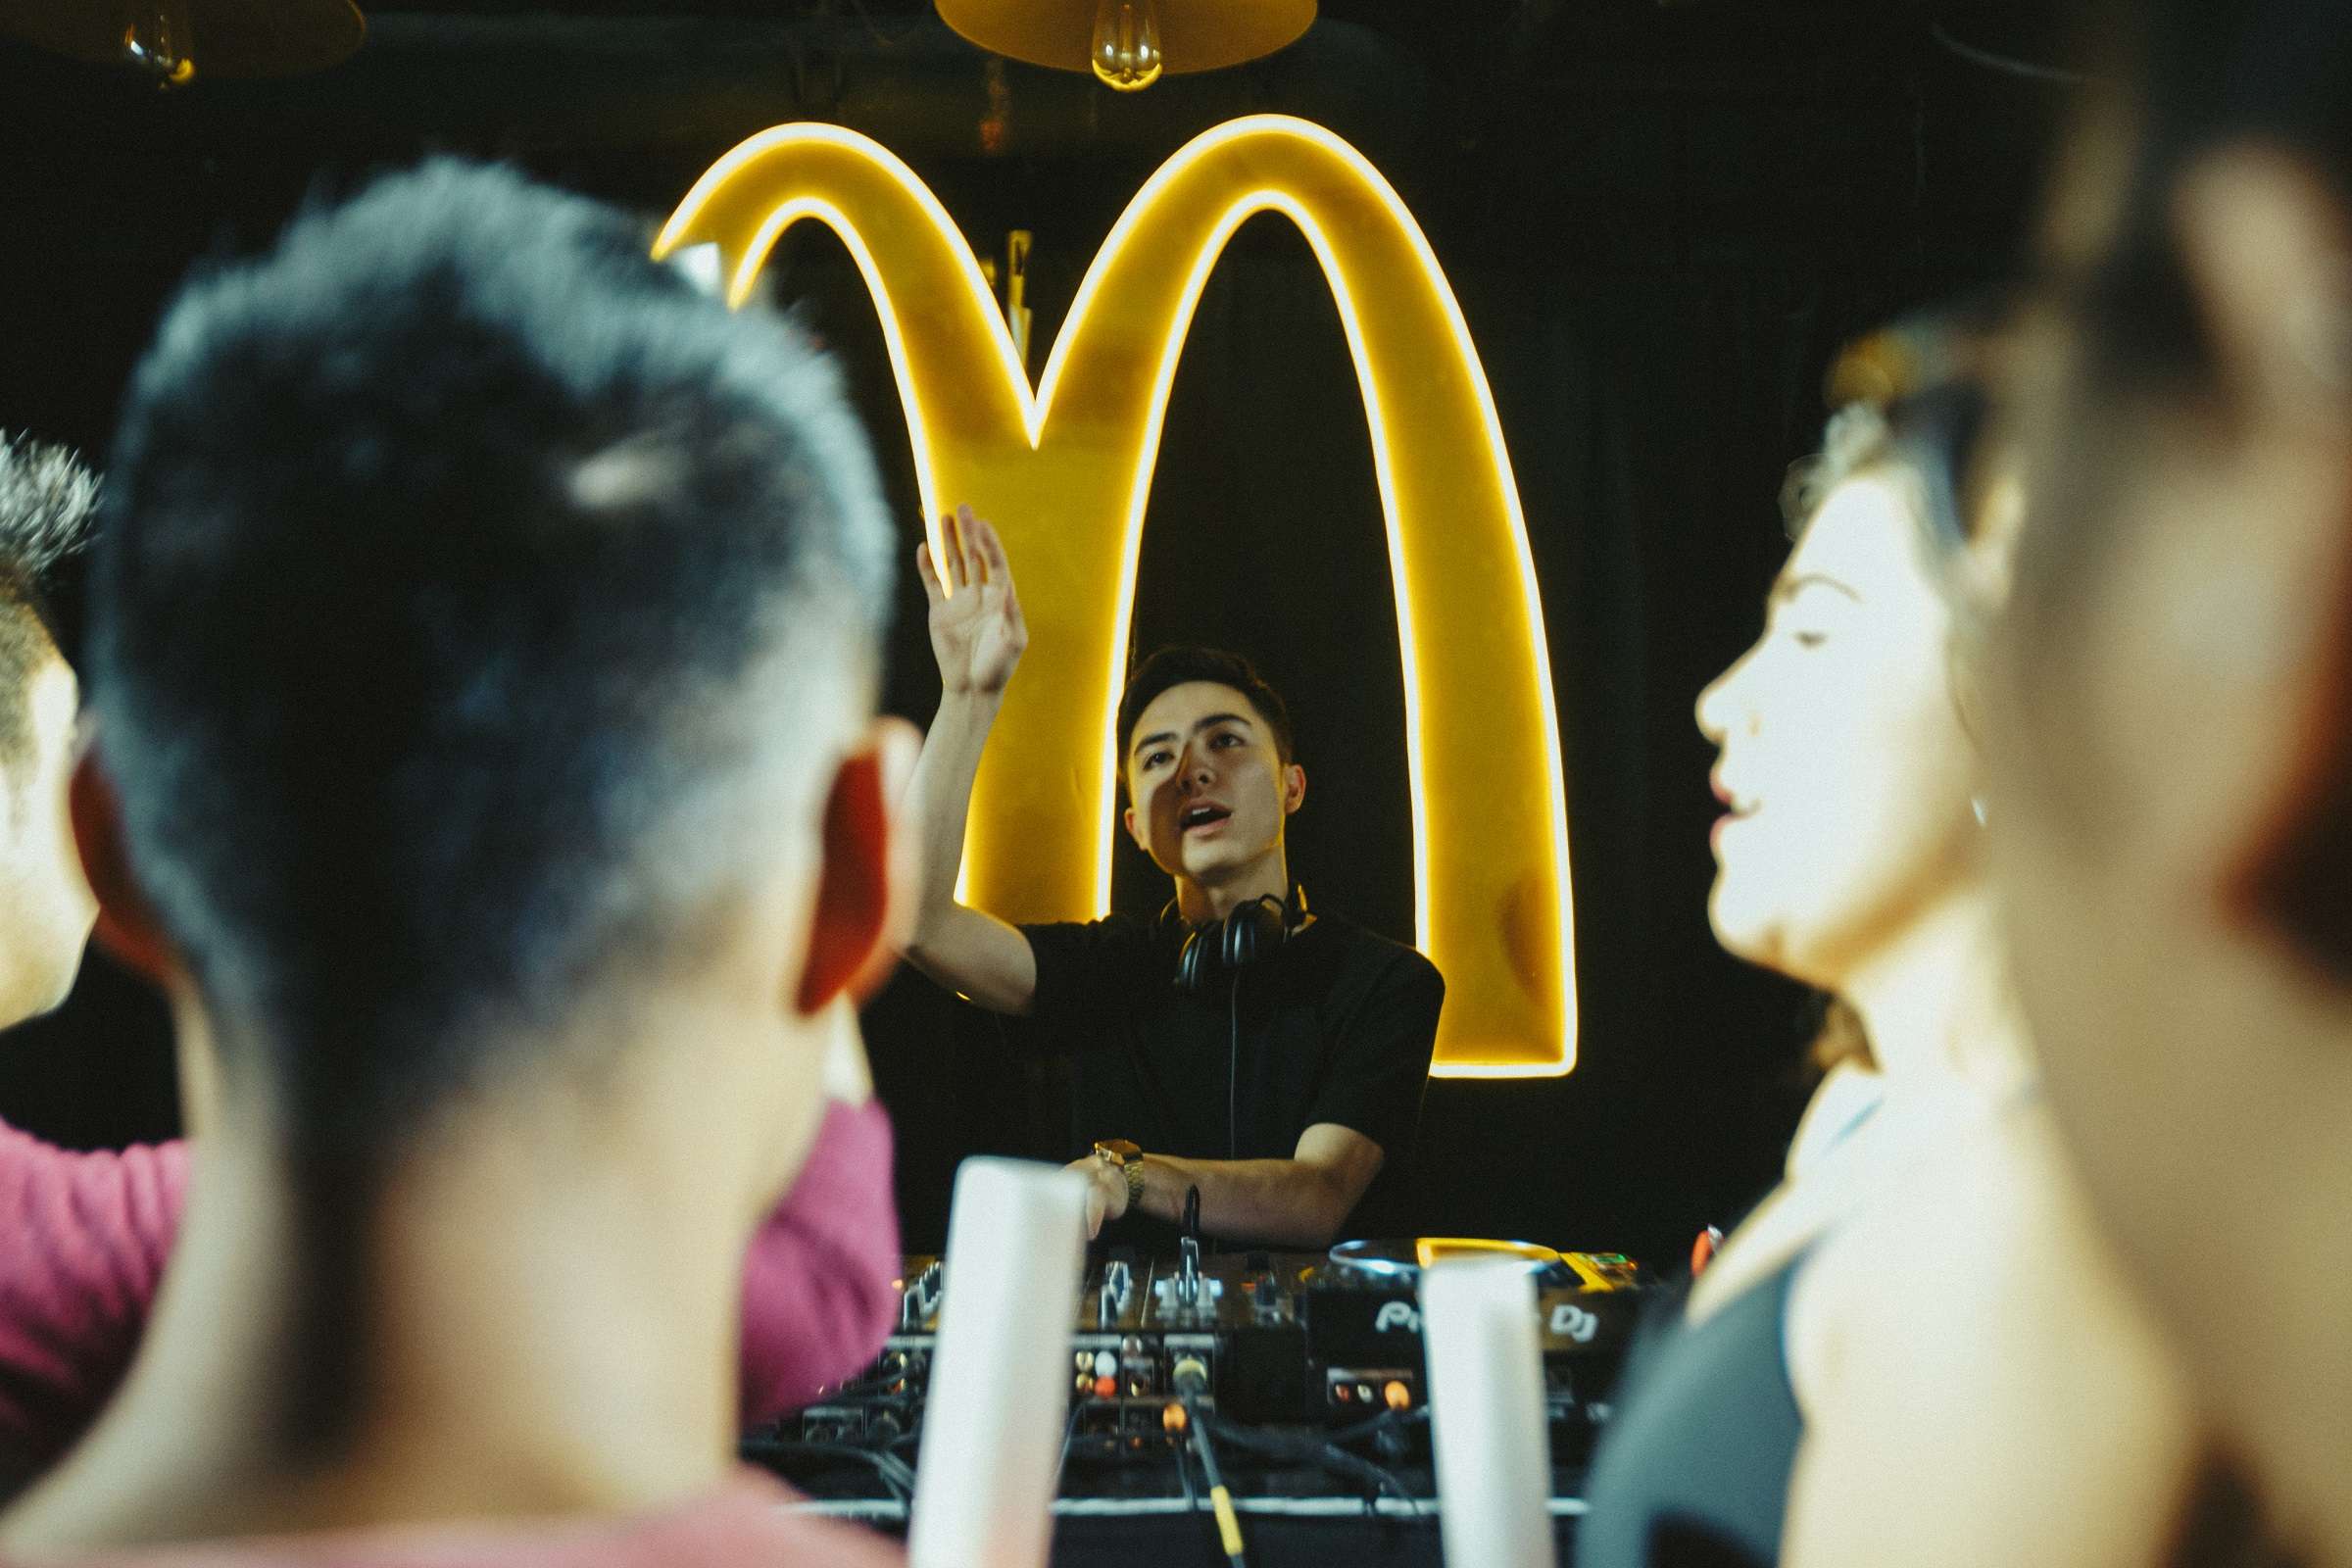 I Went To A 6am Rave Sponsored By McDonald's &amp; It Was WILD